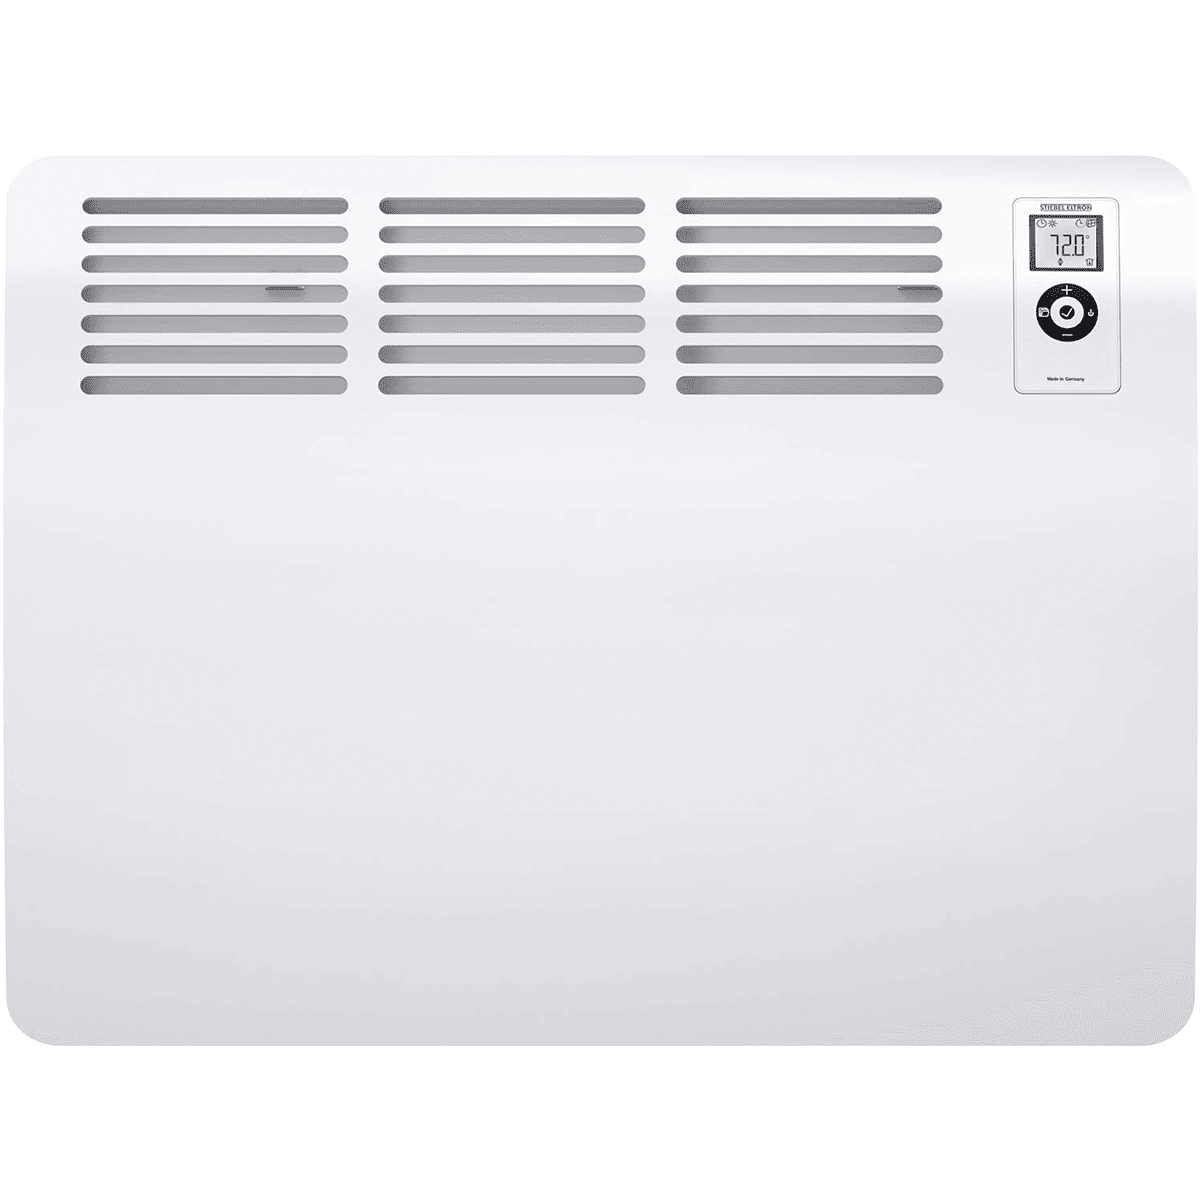 Stiebel Eltron Con Premium 120V Wall Mounted Convection Heater - 1,500W